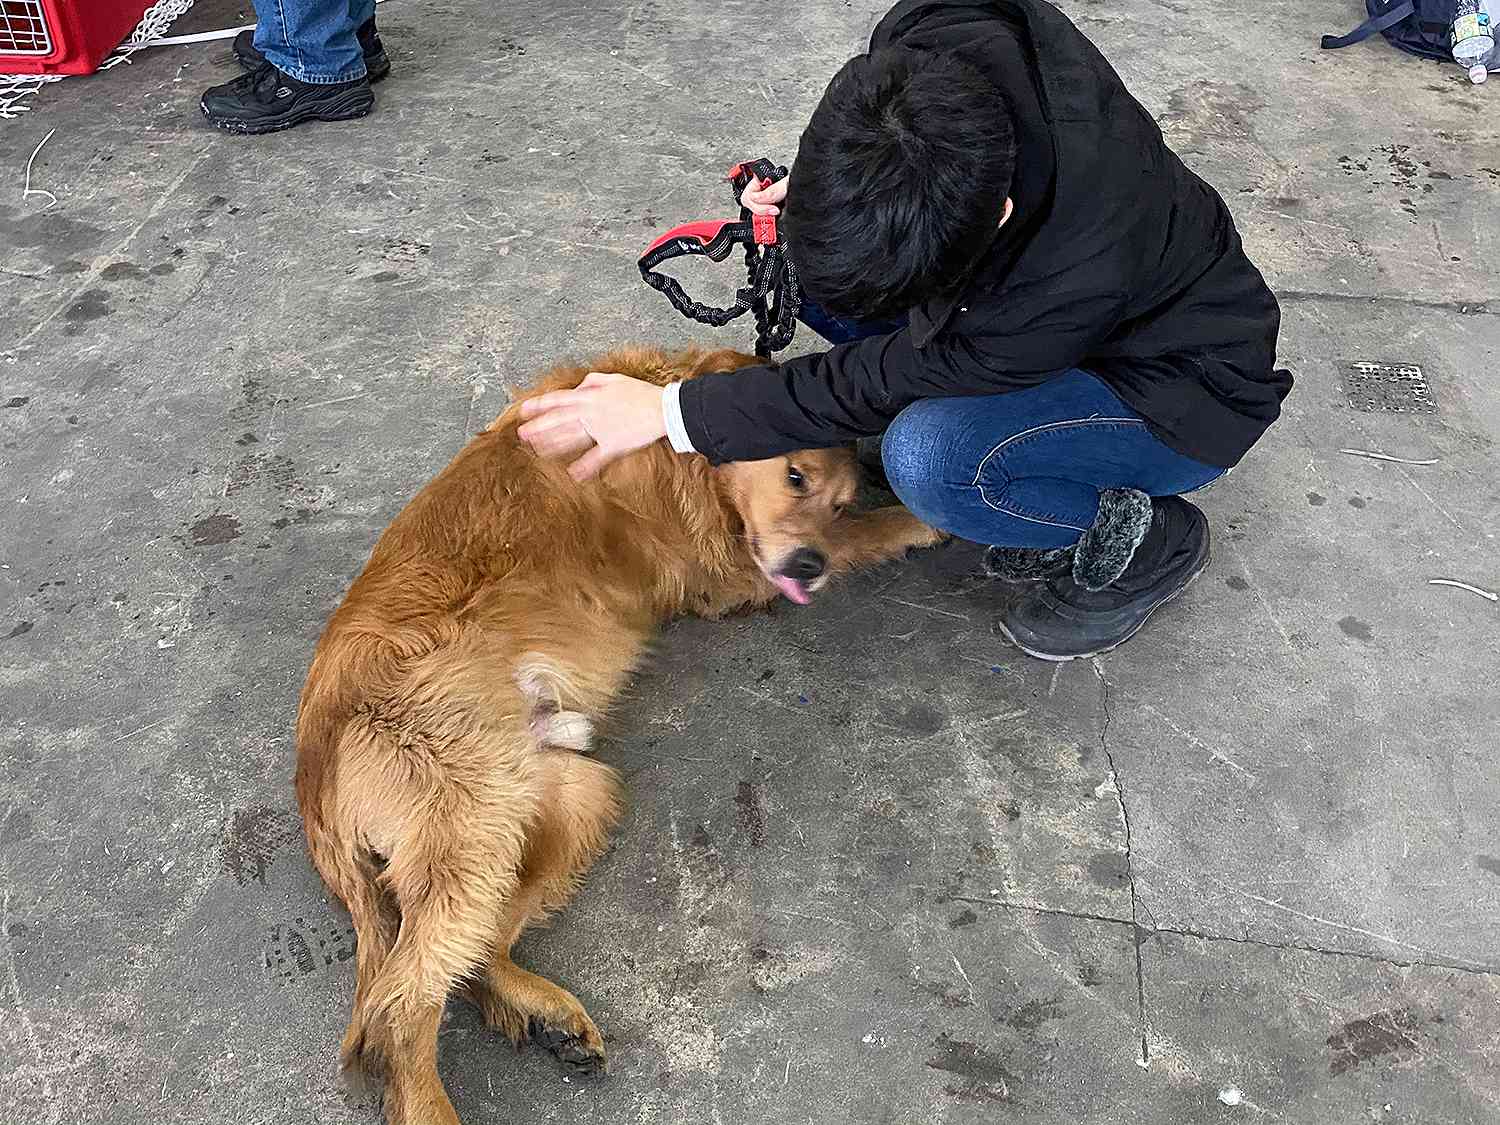 Dog Rescue from China Lands at JFK